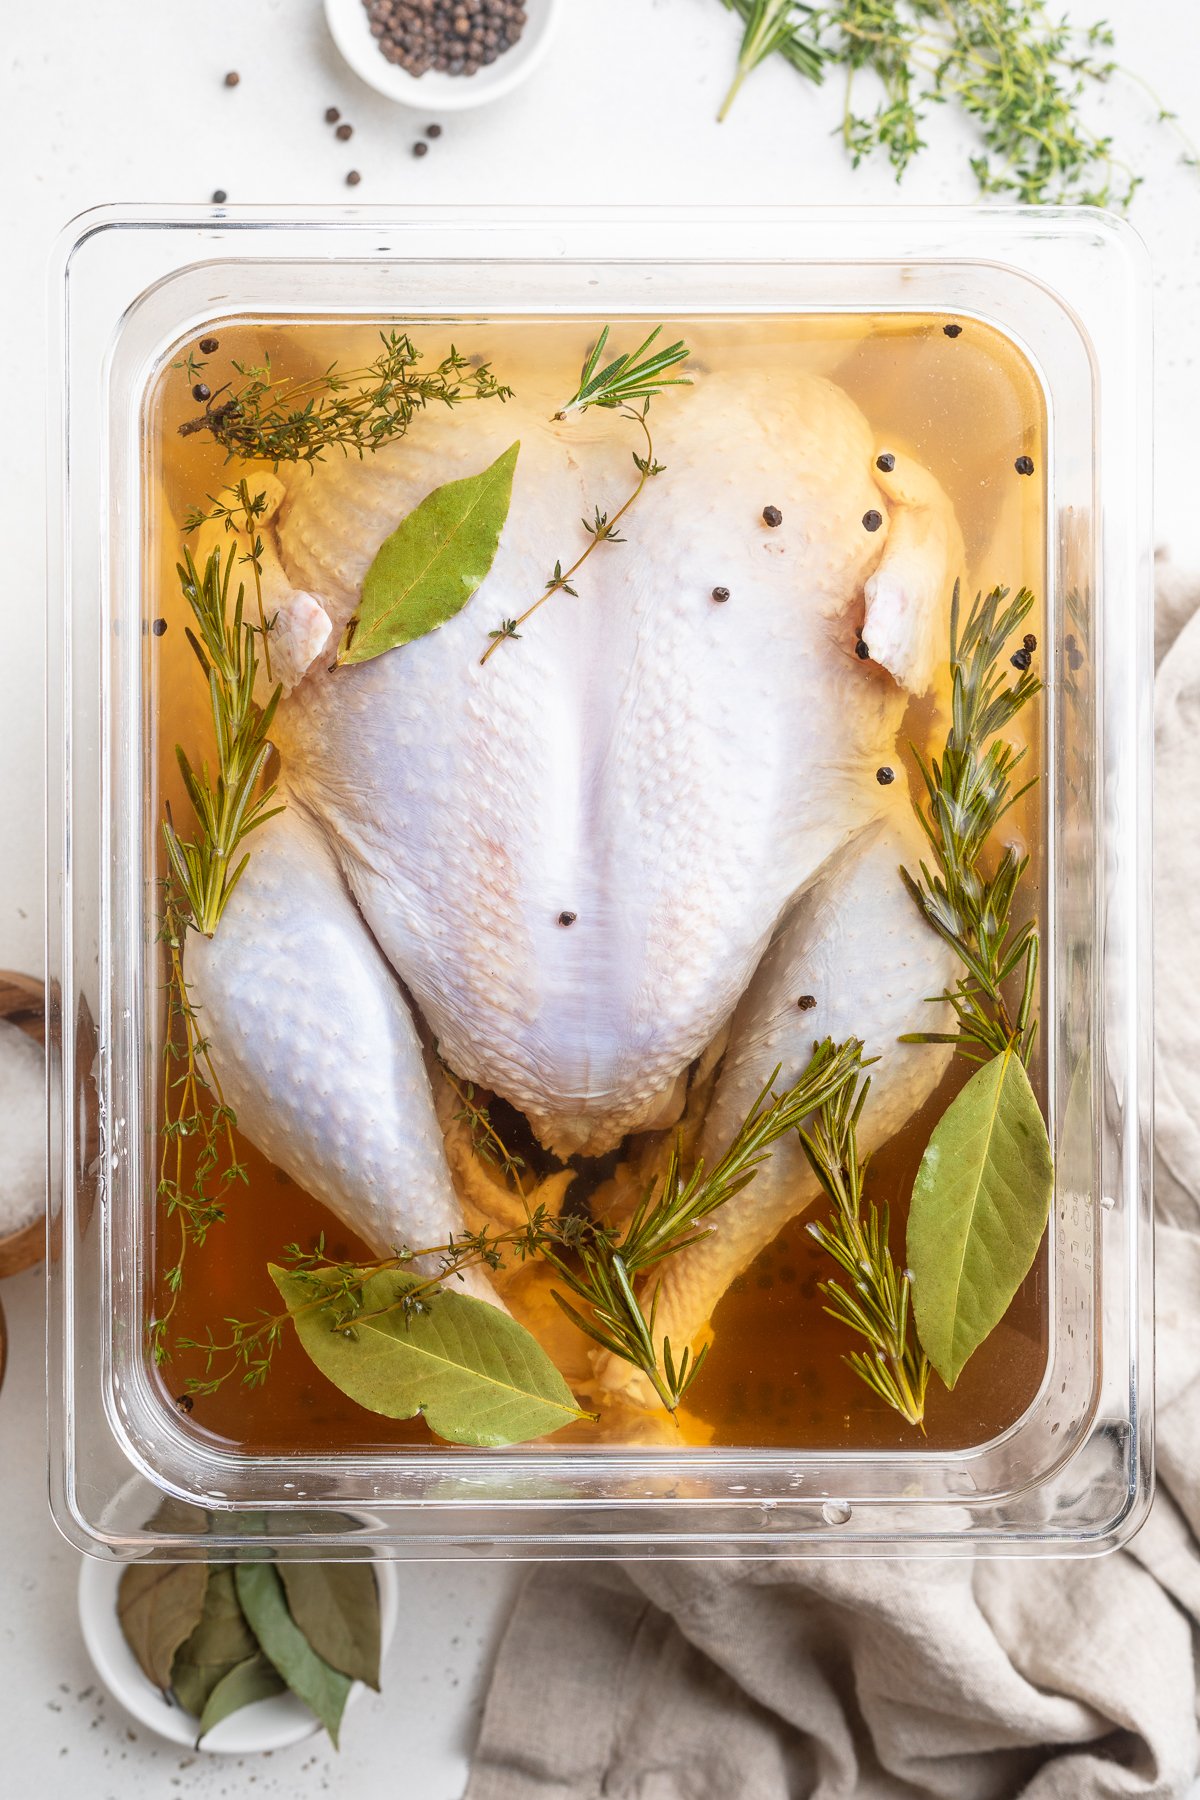 Overhead view of an uncooked whole turkey resting in a container filled with brine and aromatics on a white tabletop.